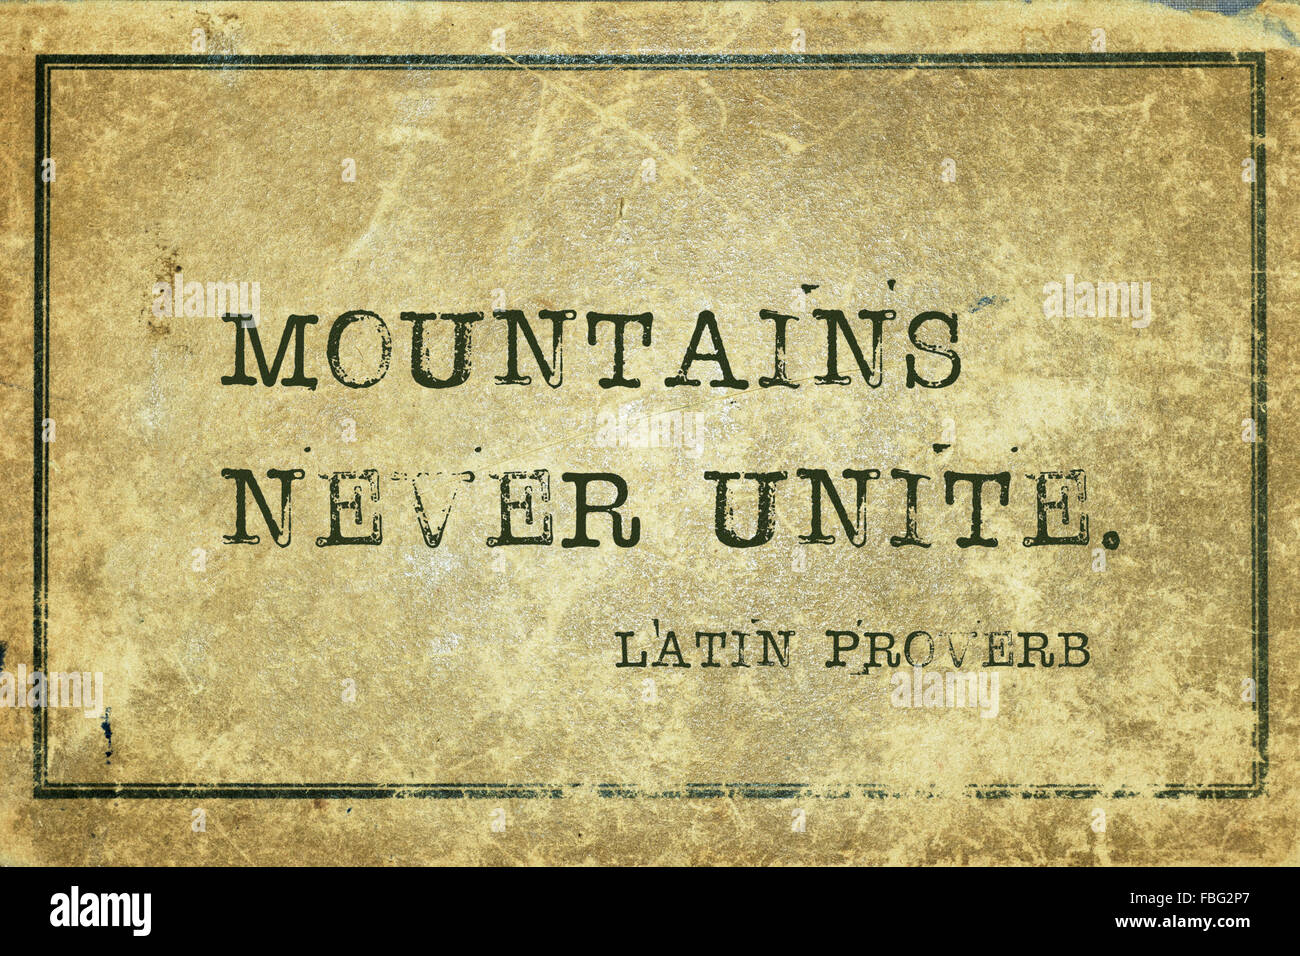 Mountains never unite - ancient Latin proverb printed on grunge vintage cardboard Stock Photo